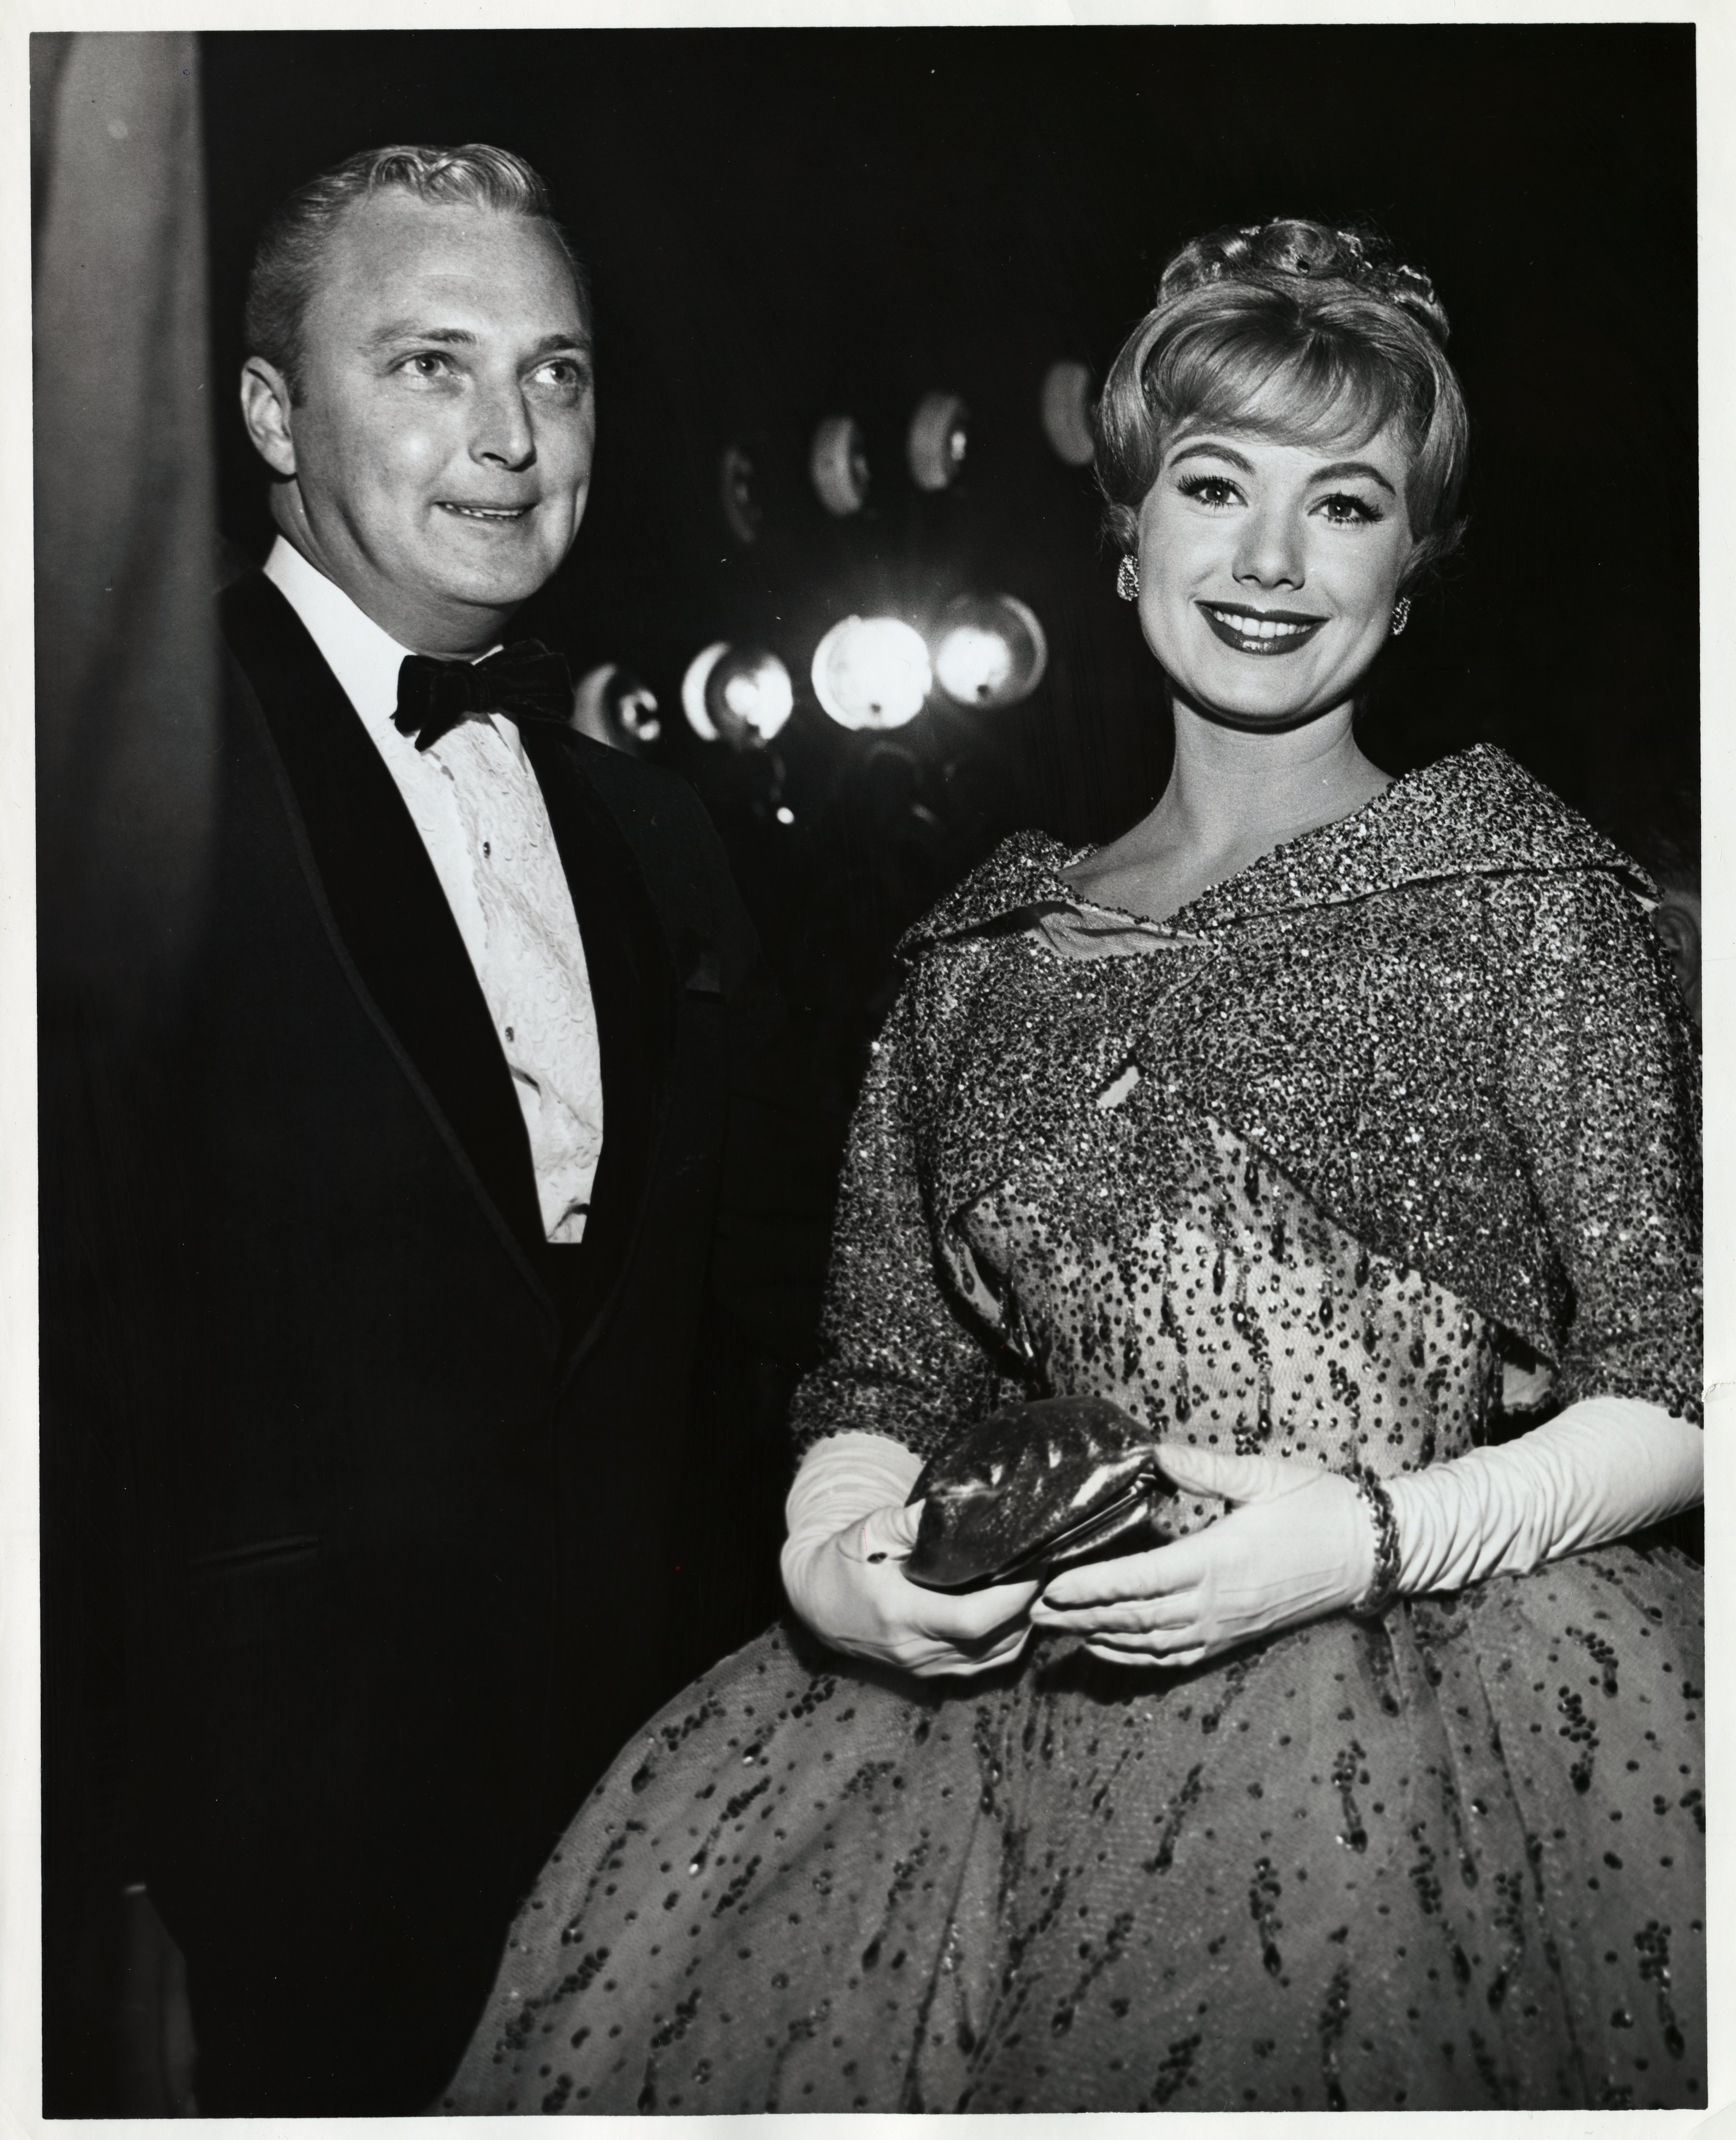 Shirley Jones and Jack Cassidy in the 60s | Source: Getty Images